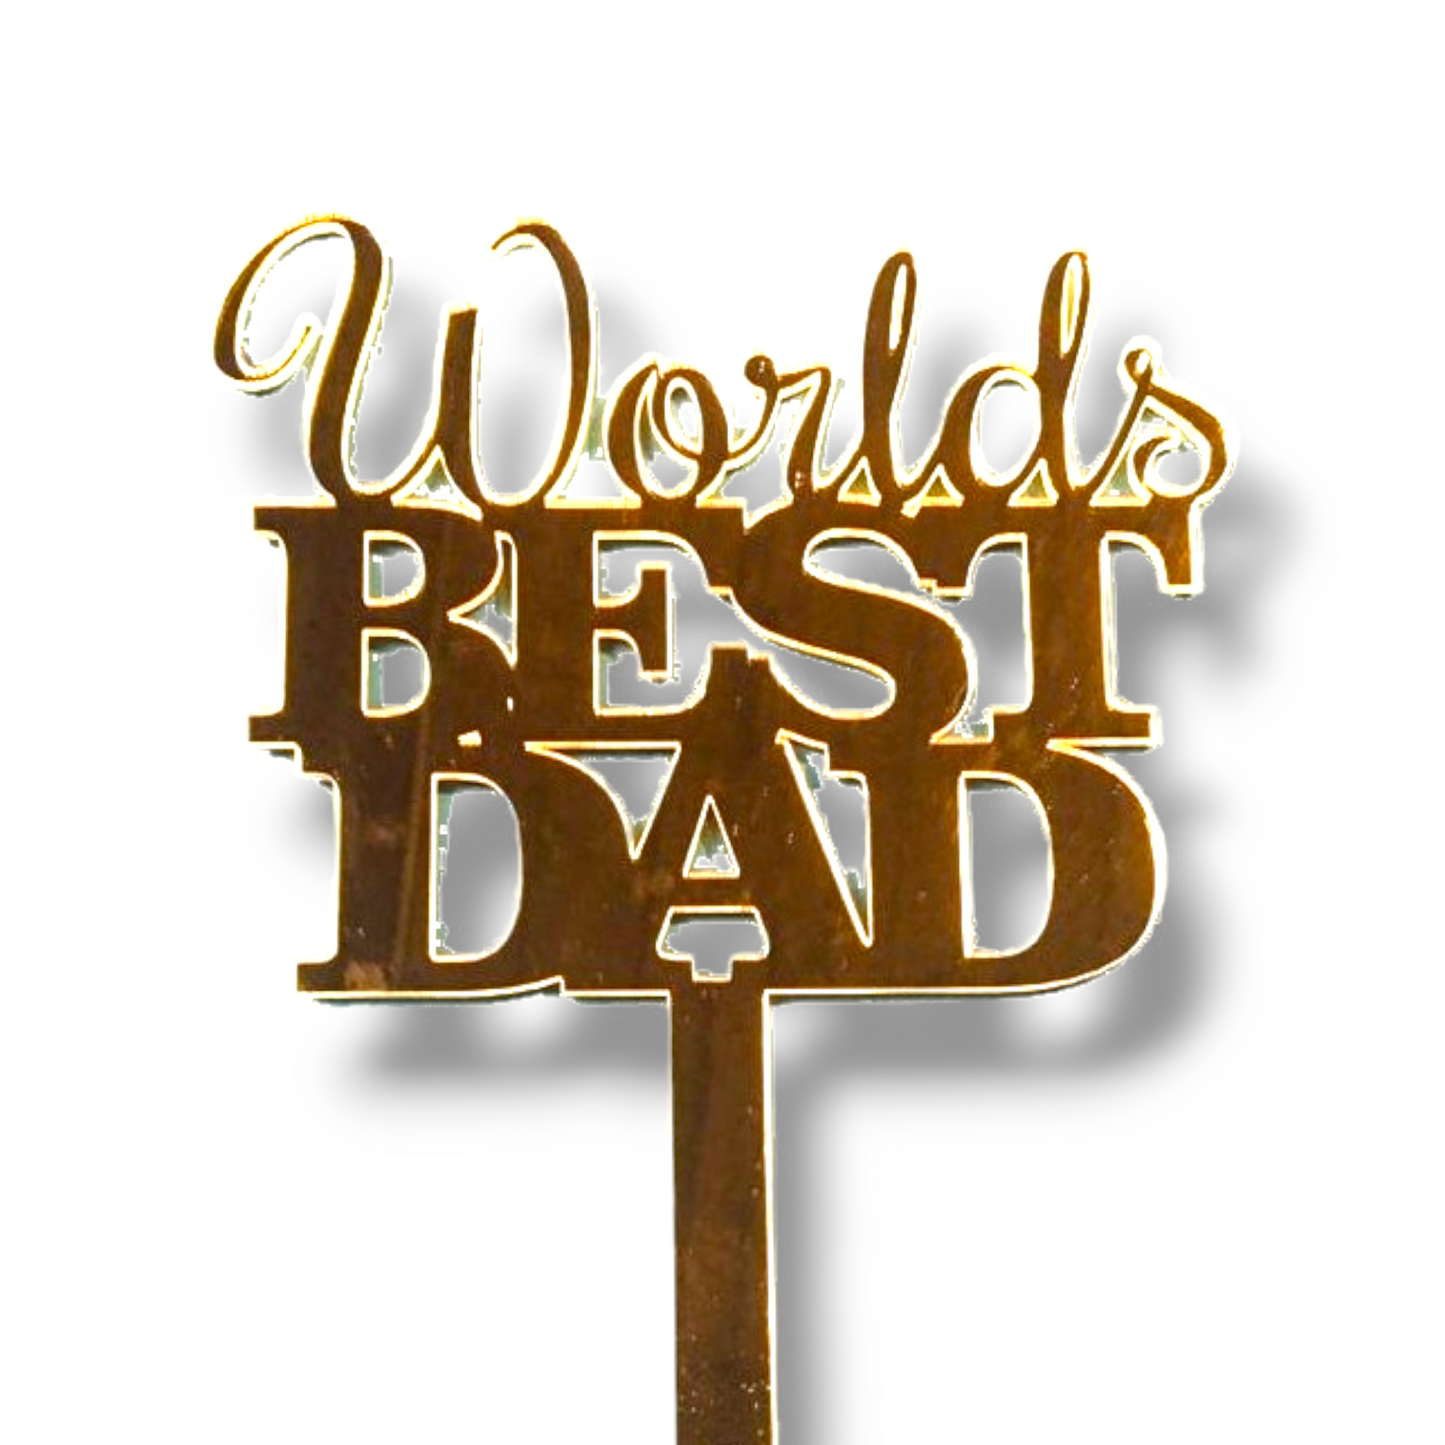 Mirror acrylic topper (gold) " World's best dad"